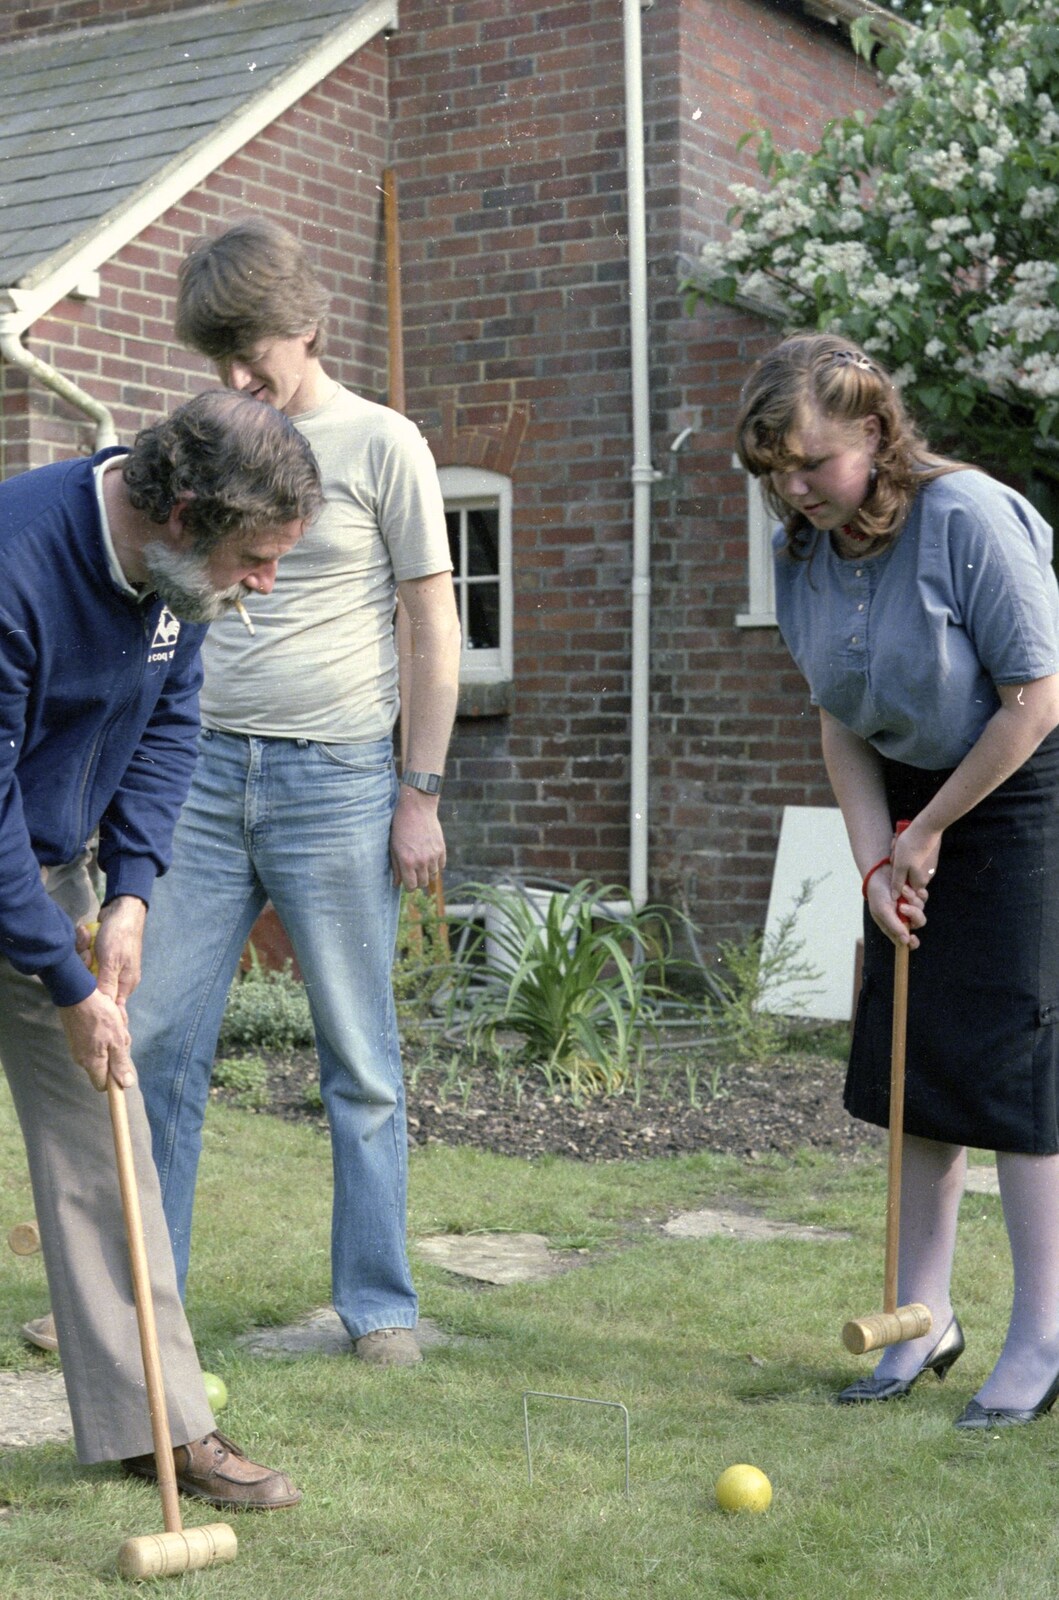 Nosher's 18th Birthday, Barton on Sea, Hampshire - 26th May 1985: Andy and Sis are head-to-head on the croquet